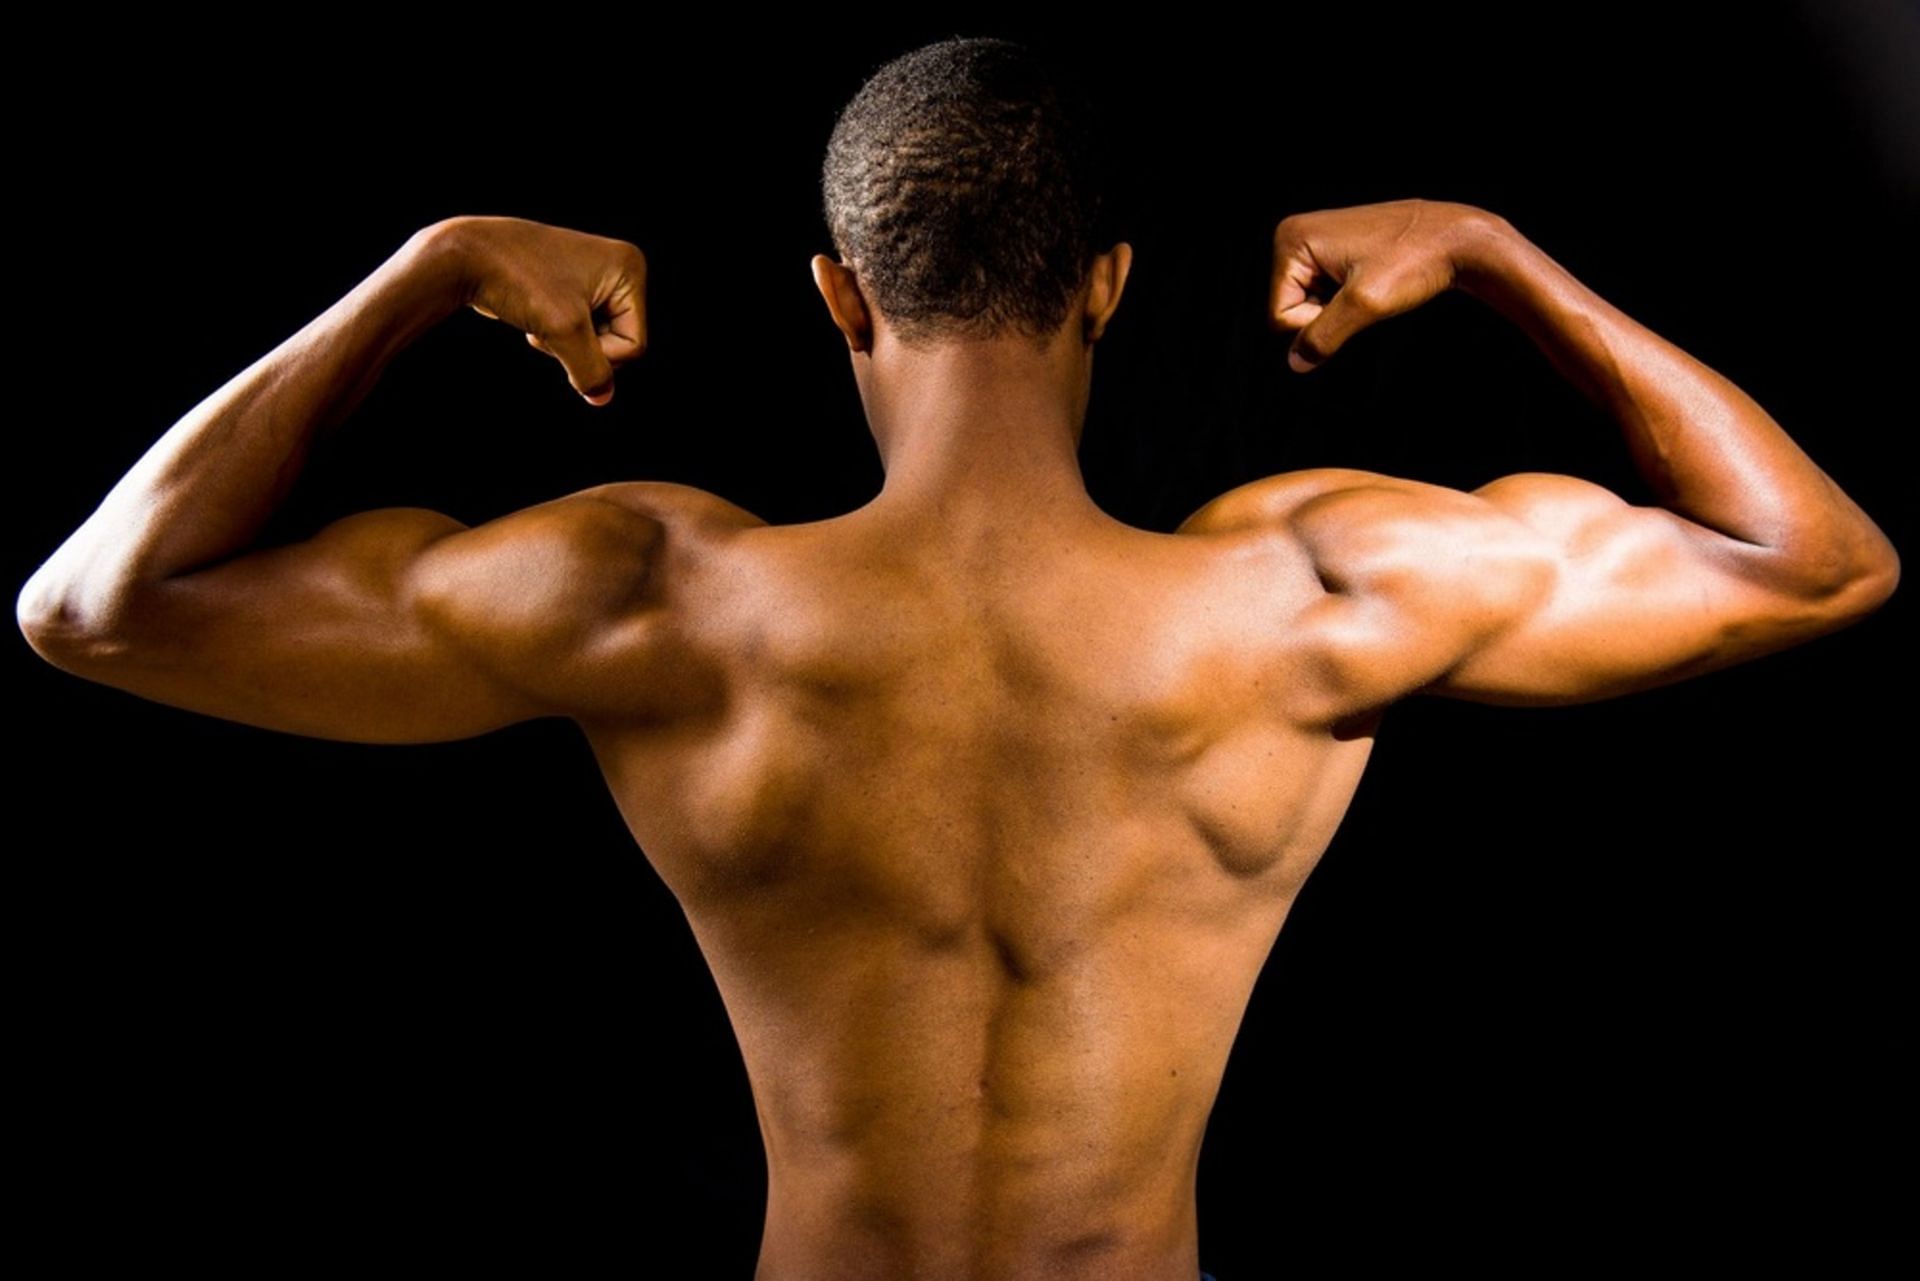 The lats are broad, fan-shaped muscles that cover a large area of the back.(Photo by Nigel Msipa on Unsplash)